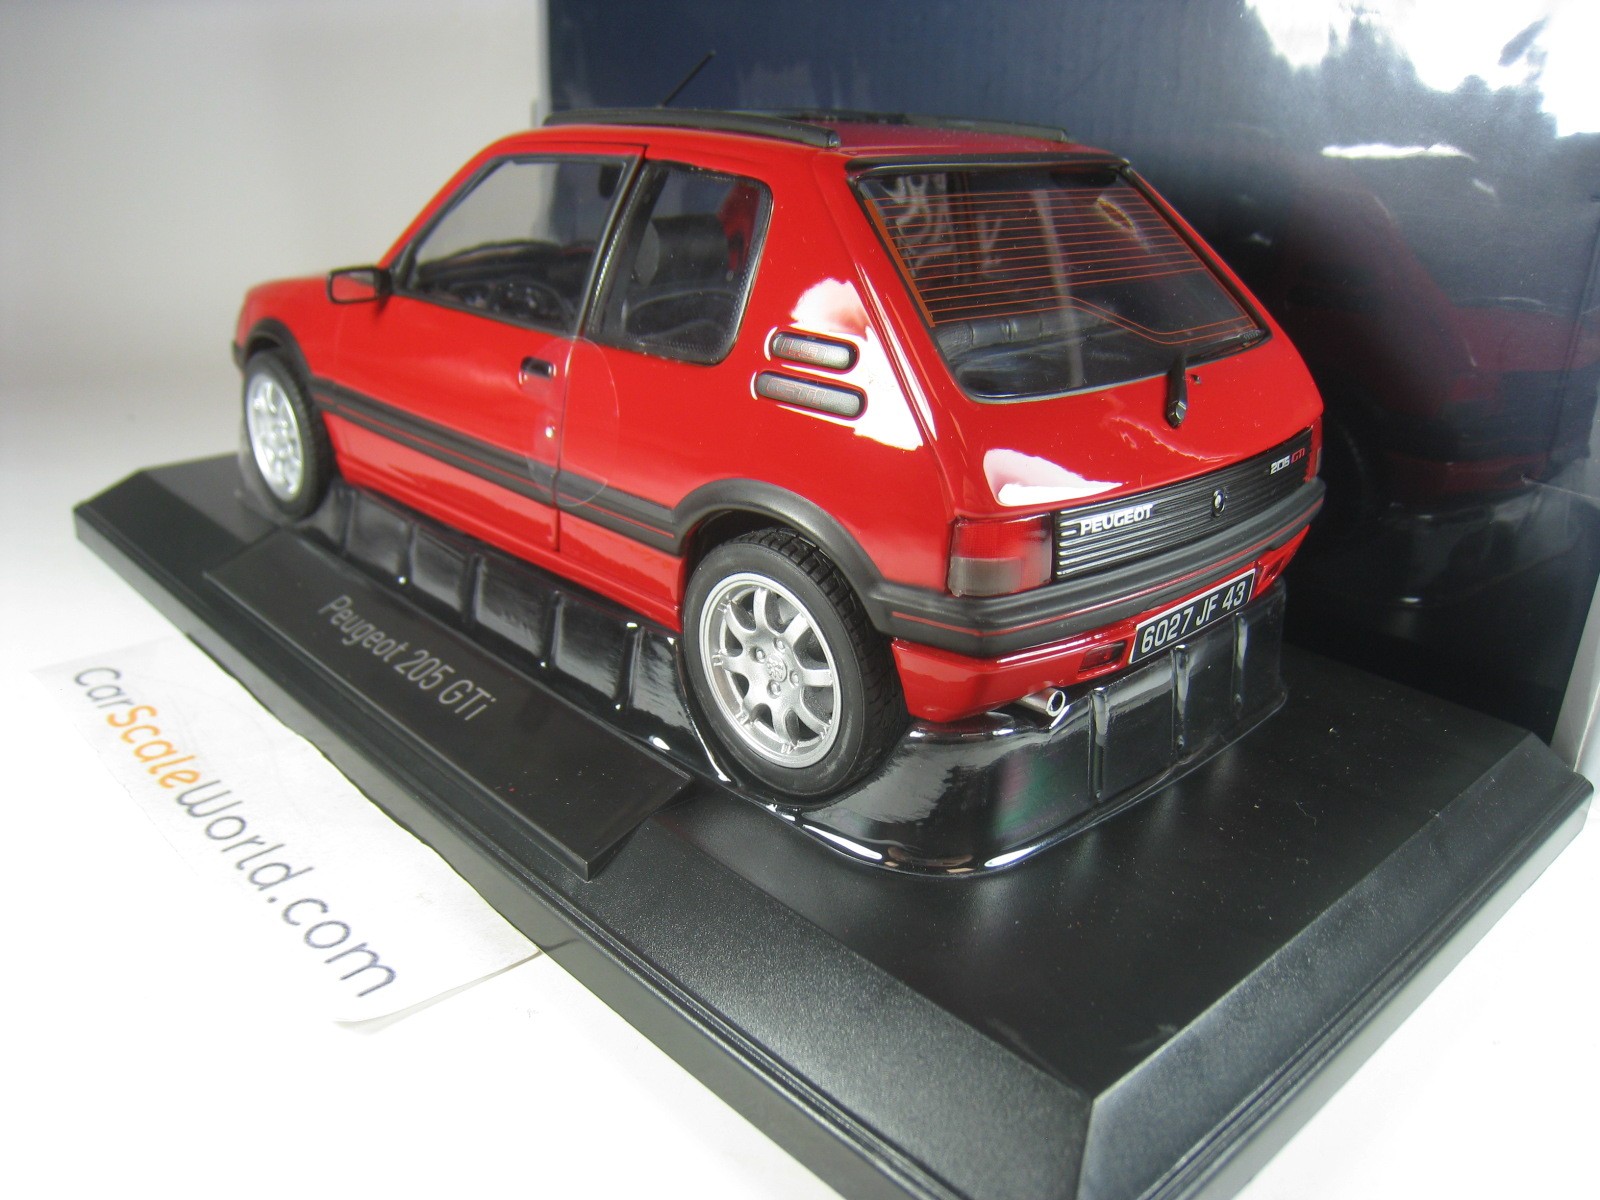 Norev 1/18 Scale 184848 - Peugeot 205 GTI 1.9 PTS Rims 1991 - Red